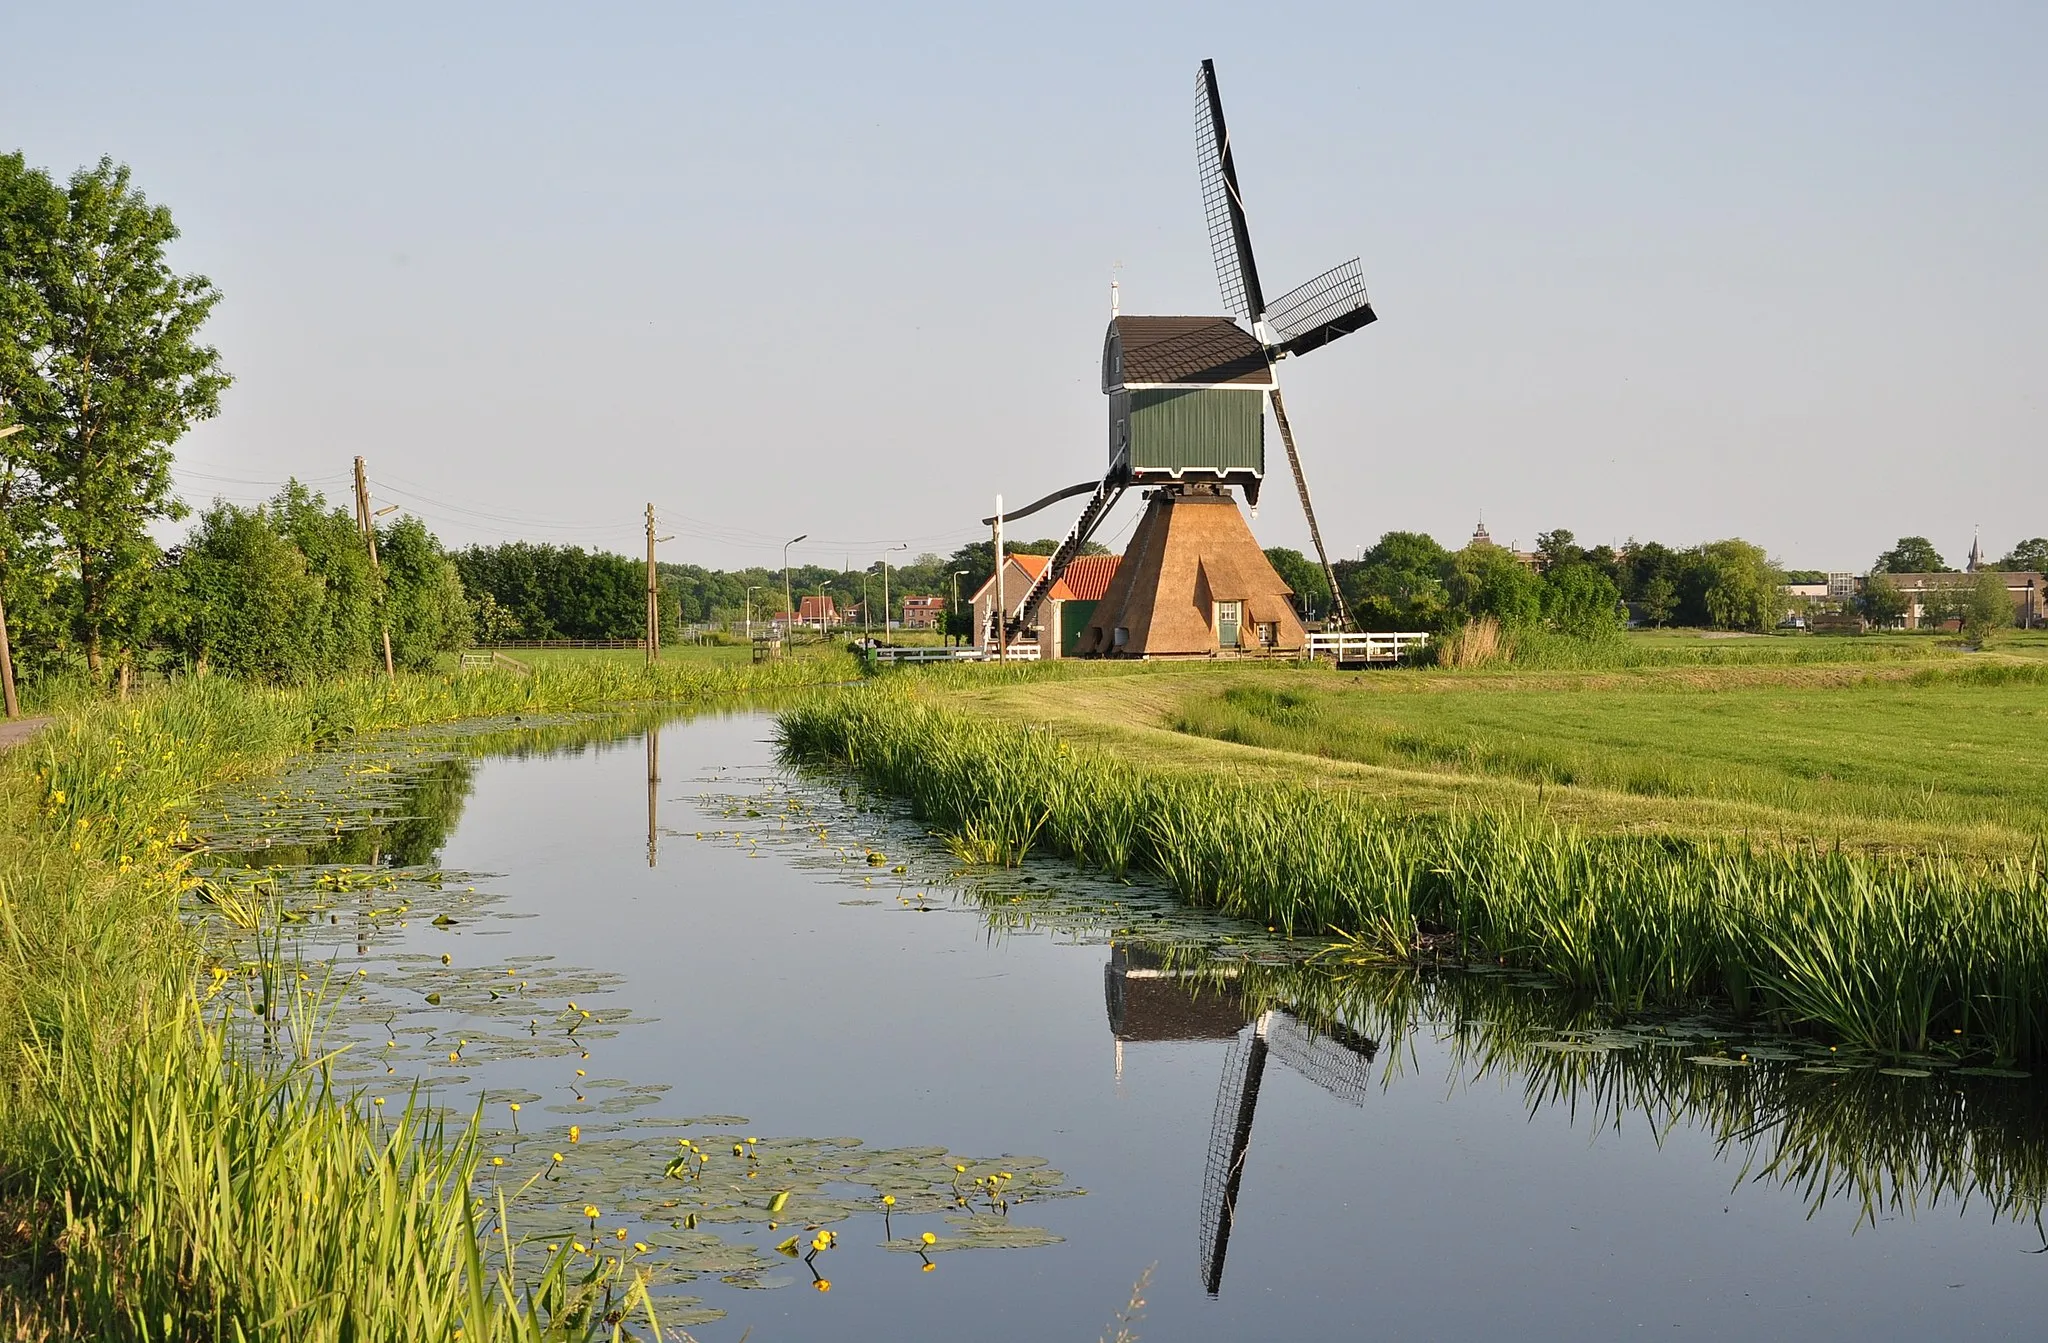 Photo showing: Windmill 'Bonrepas' on the shore of the Vlist river (municipality Vlist, Province South Holland, Netherlands).